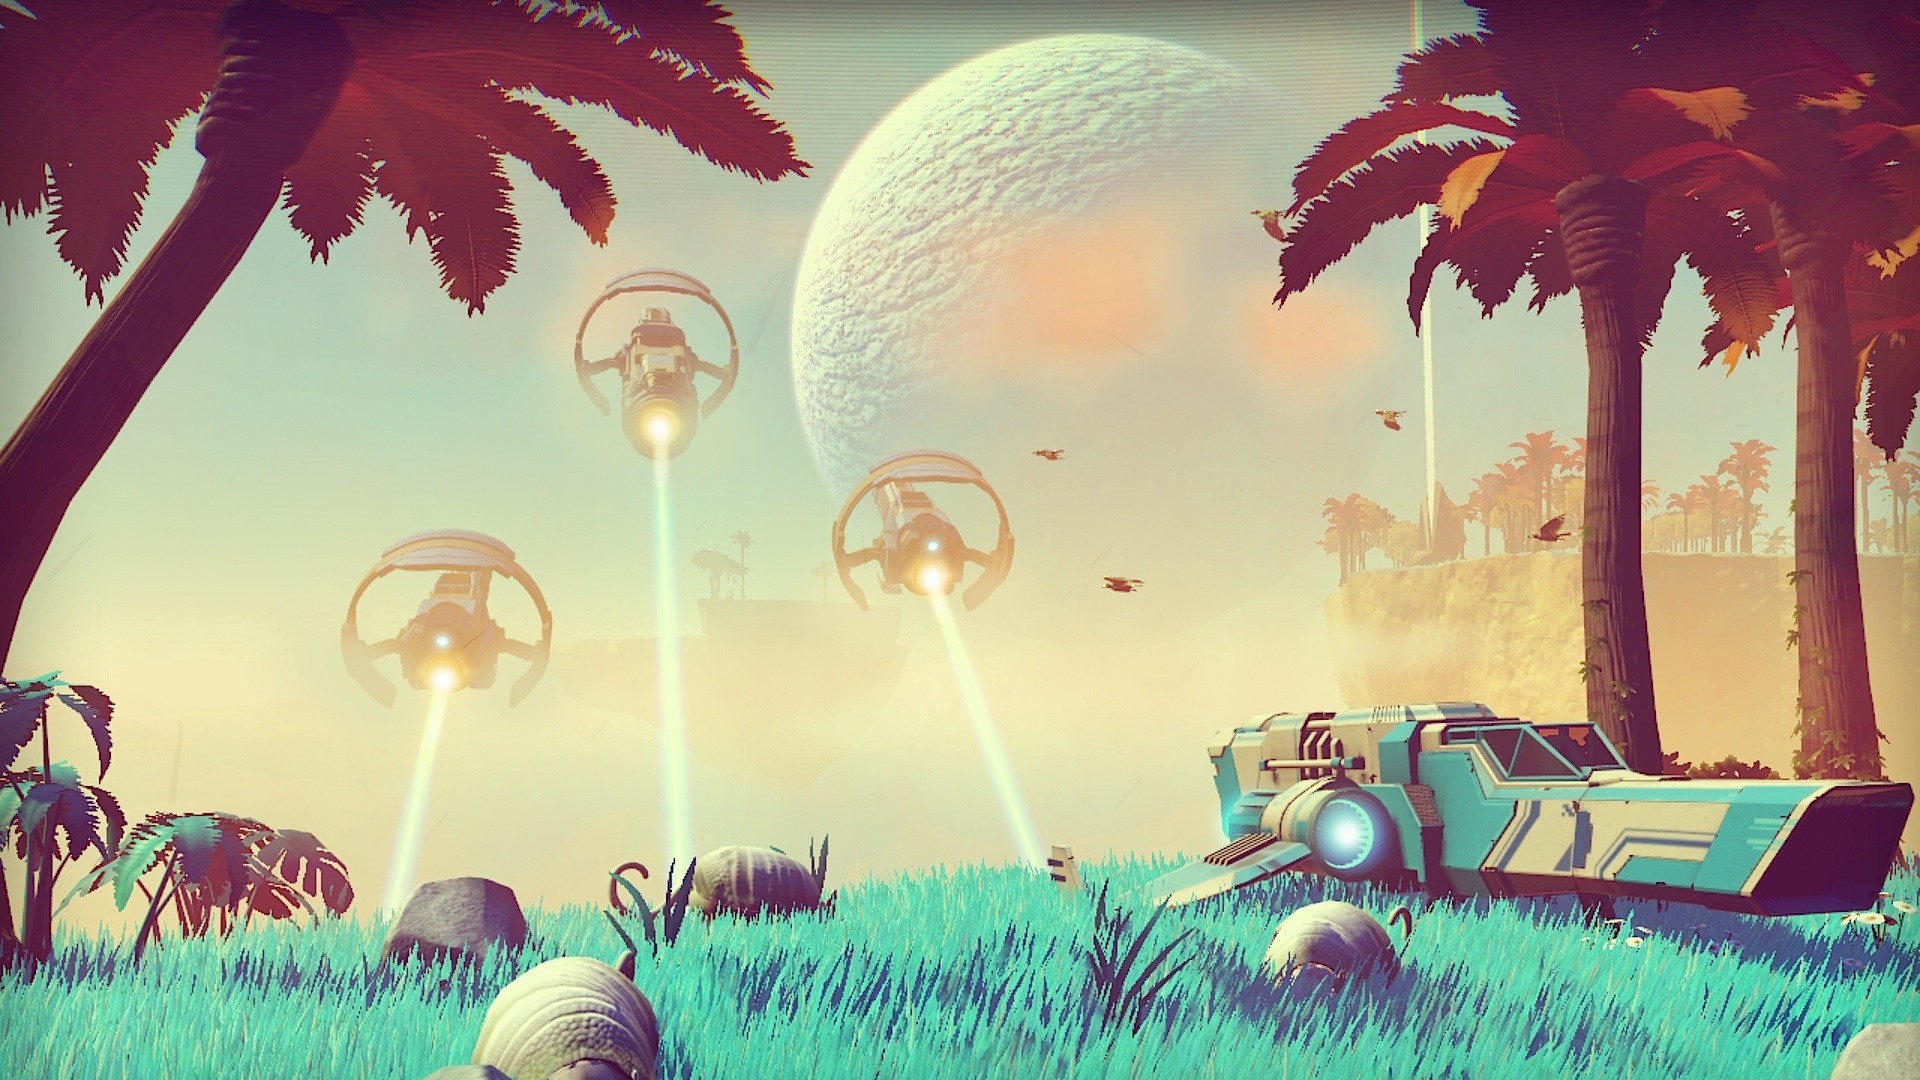 watch-the-story-behind-hello-games-no-man-s-sky